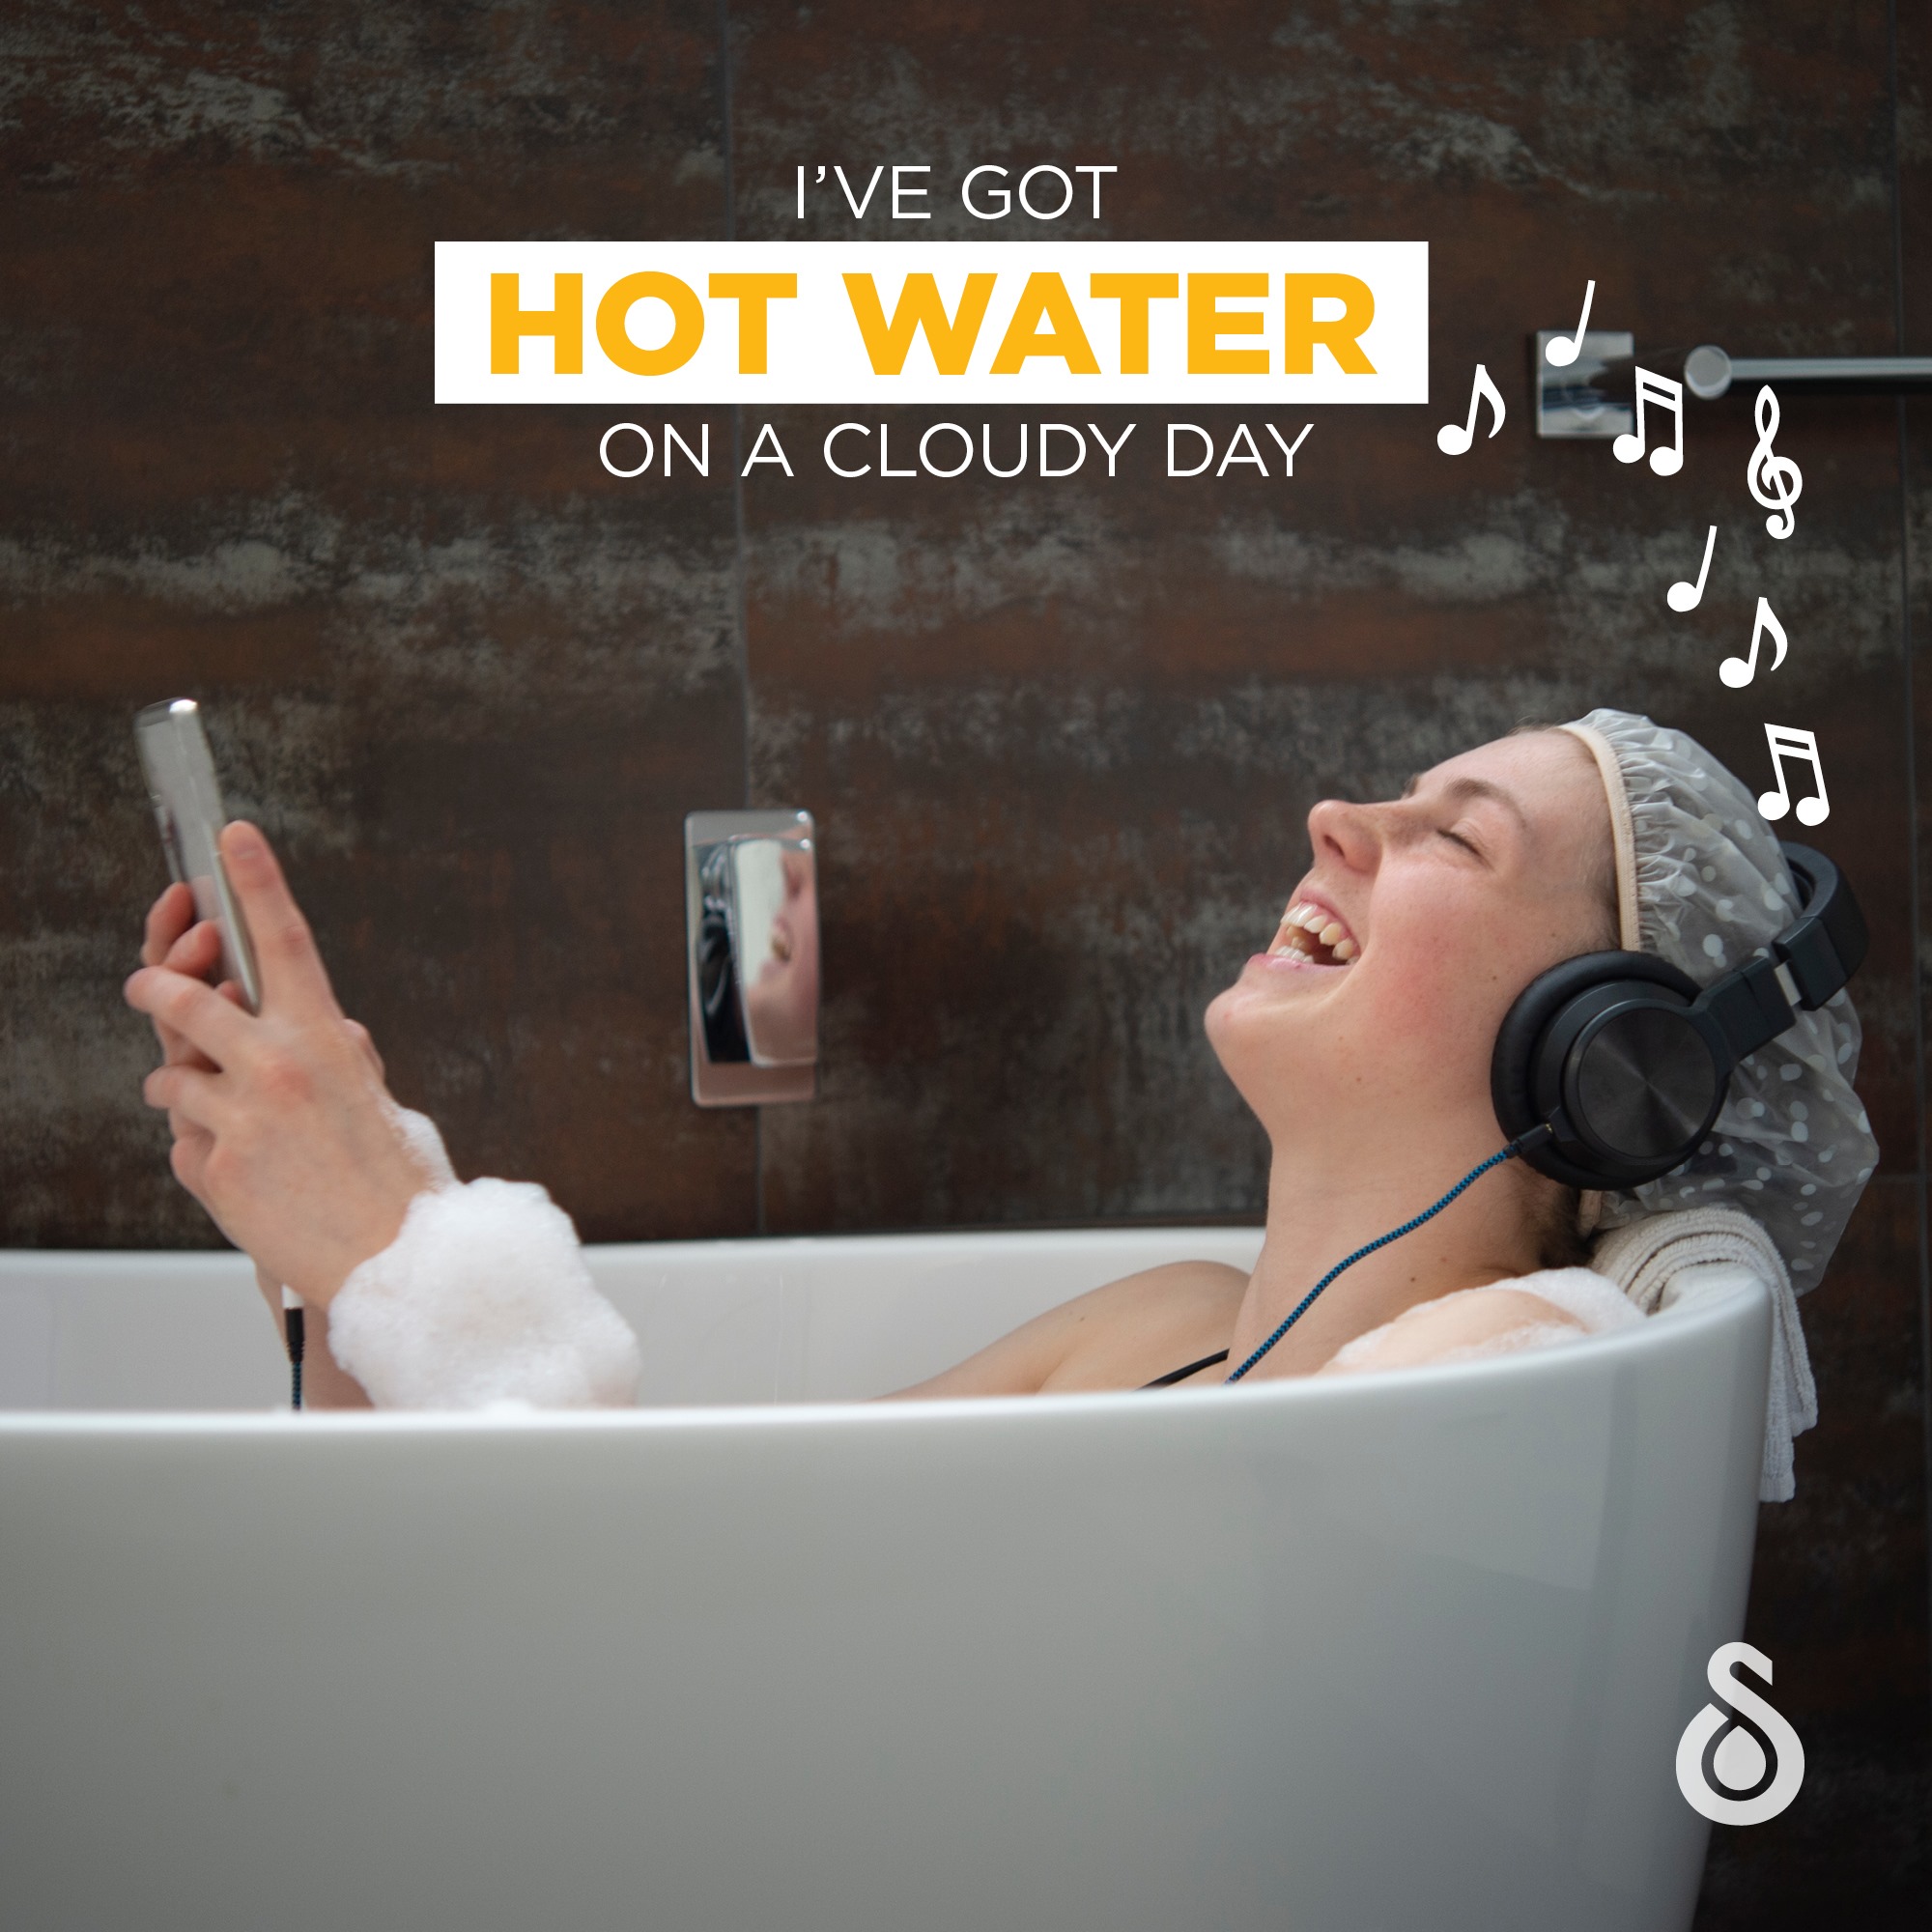 Lady listening to music in a bubble bath with the caption I've got hot water on a cloudy day.